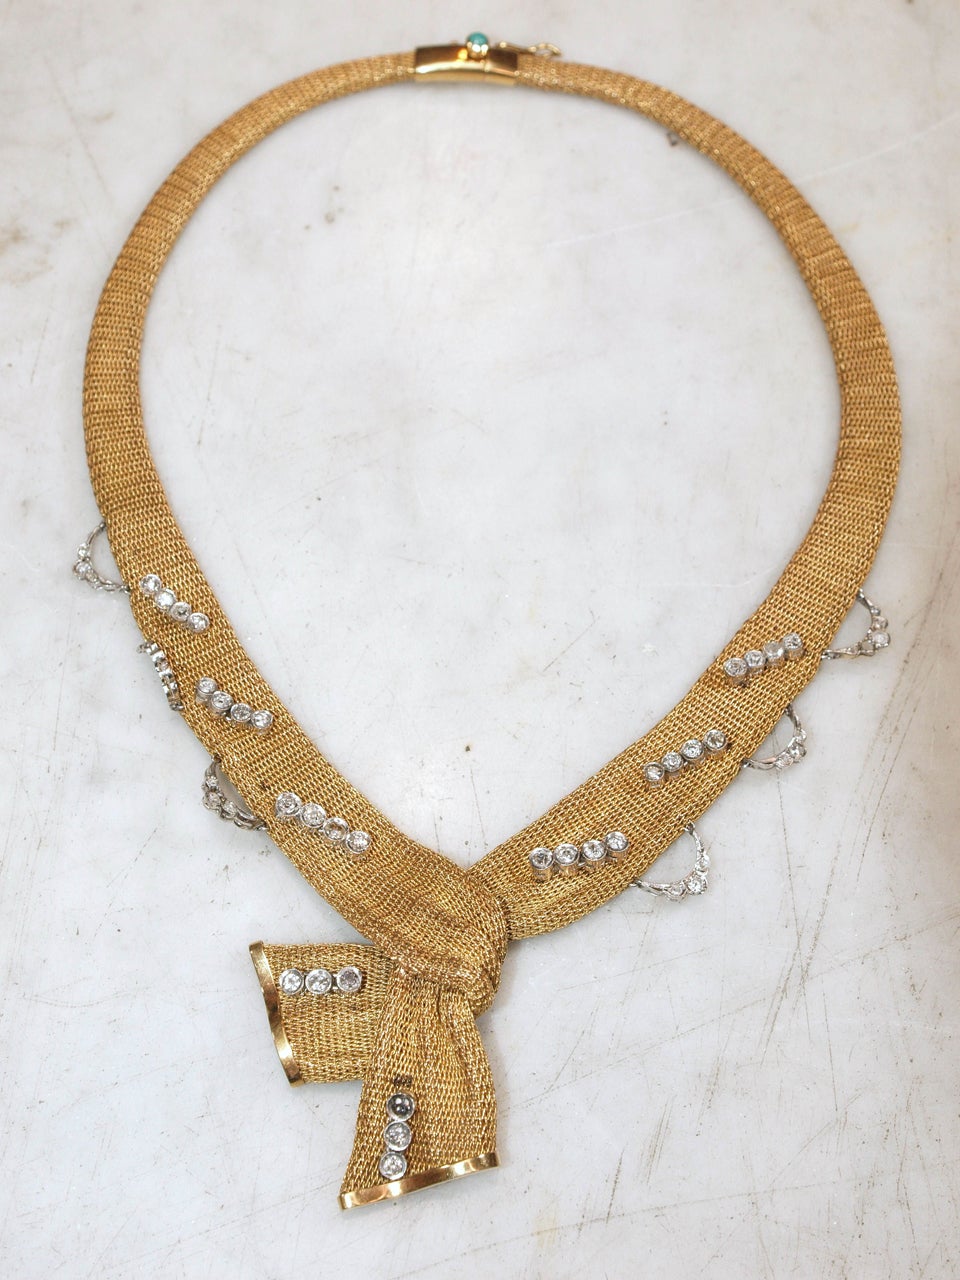 Mesh Gold Necklace with 2 carats mine cut Diamonds DeTurquoise marker on clasp